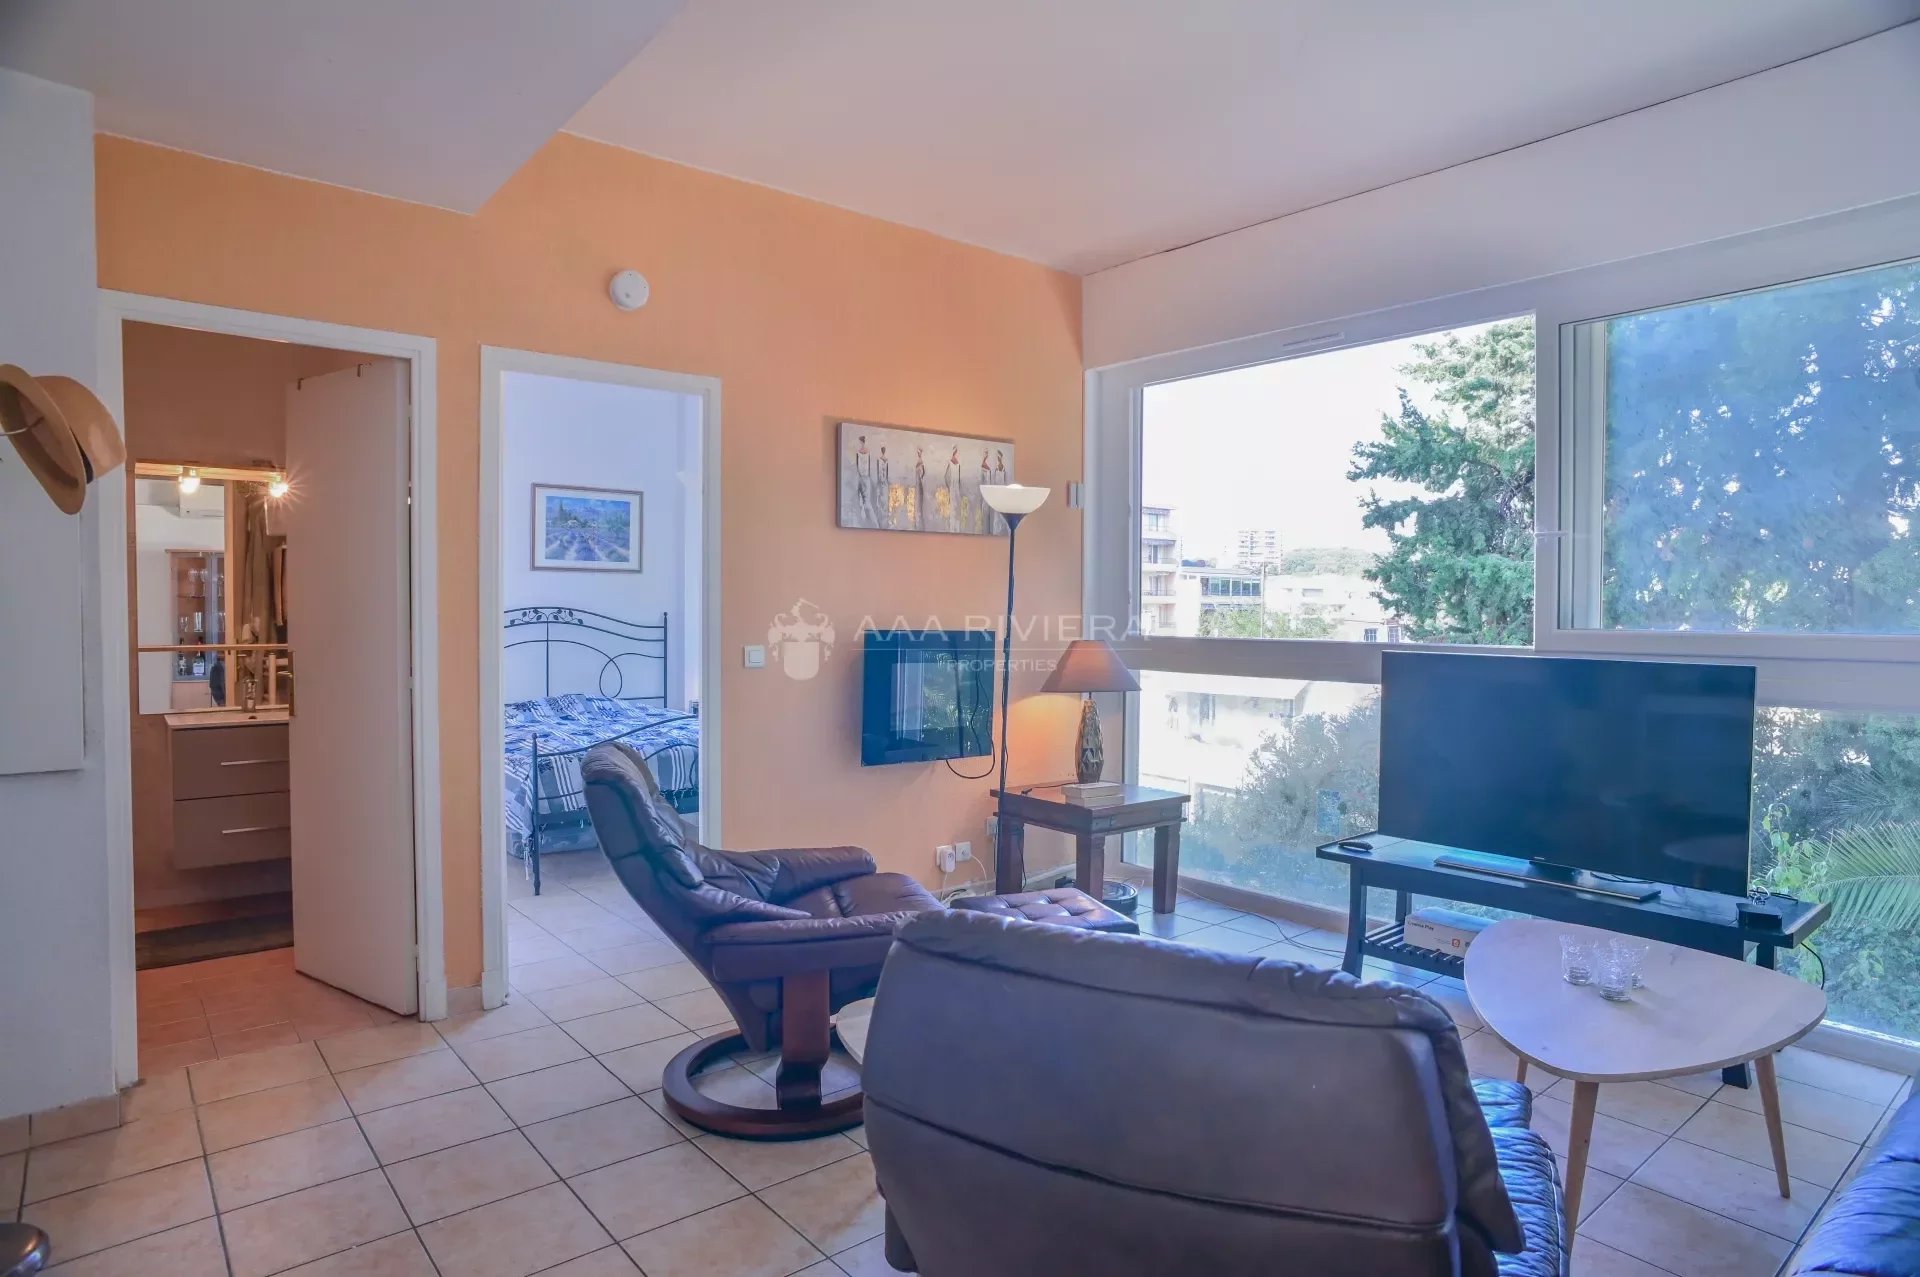 SOLE AGENT - CANNES - Unique 2 bedroom apt with 80m² private secure terrace, 2.4 km from the Croisette. Lift, parking